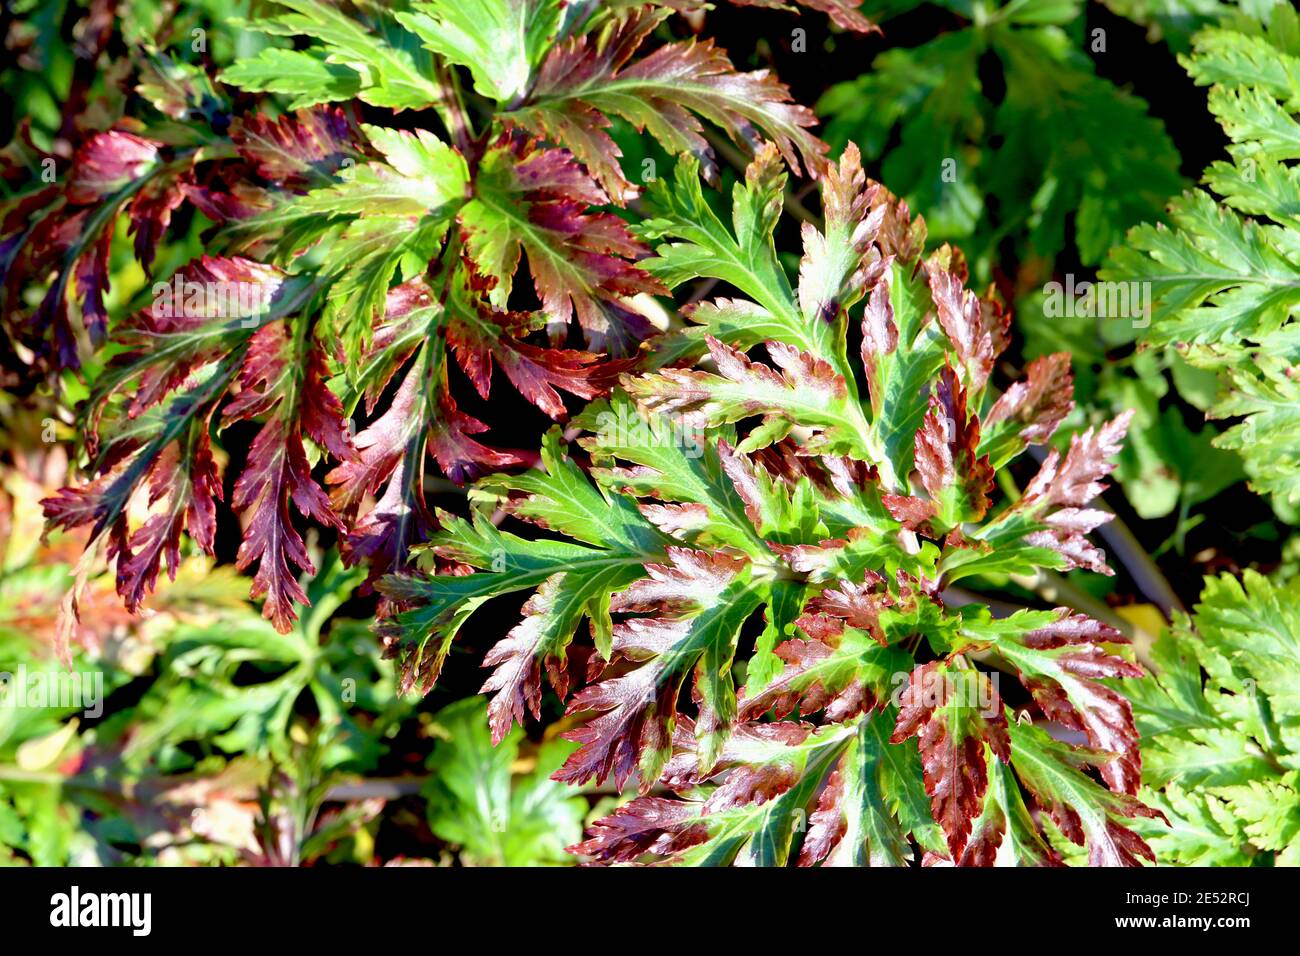 Geranium maderense leaves Giant herb Robert – large fern-like green leaves flushed with red,  January, England, UK Stock Photo